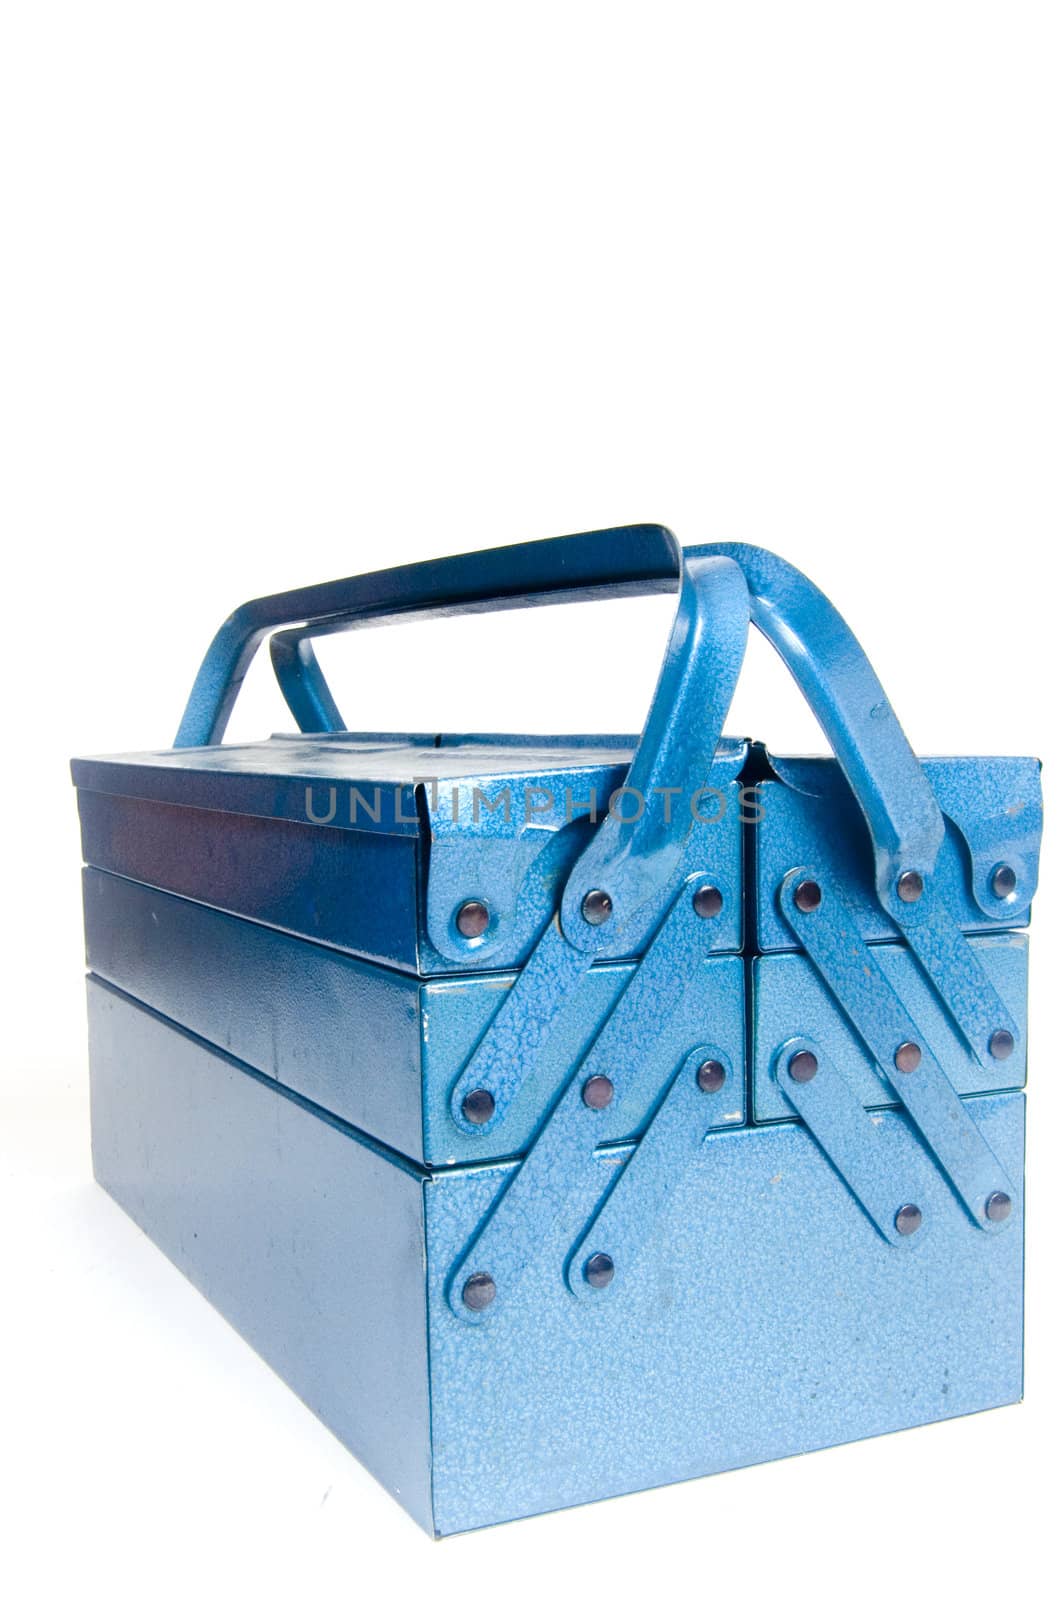 blue tool box isolated on white background by ladyminnie